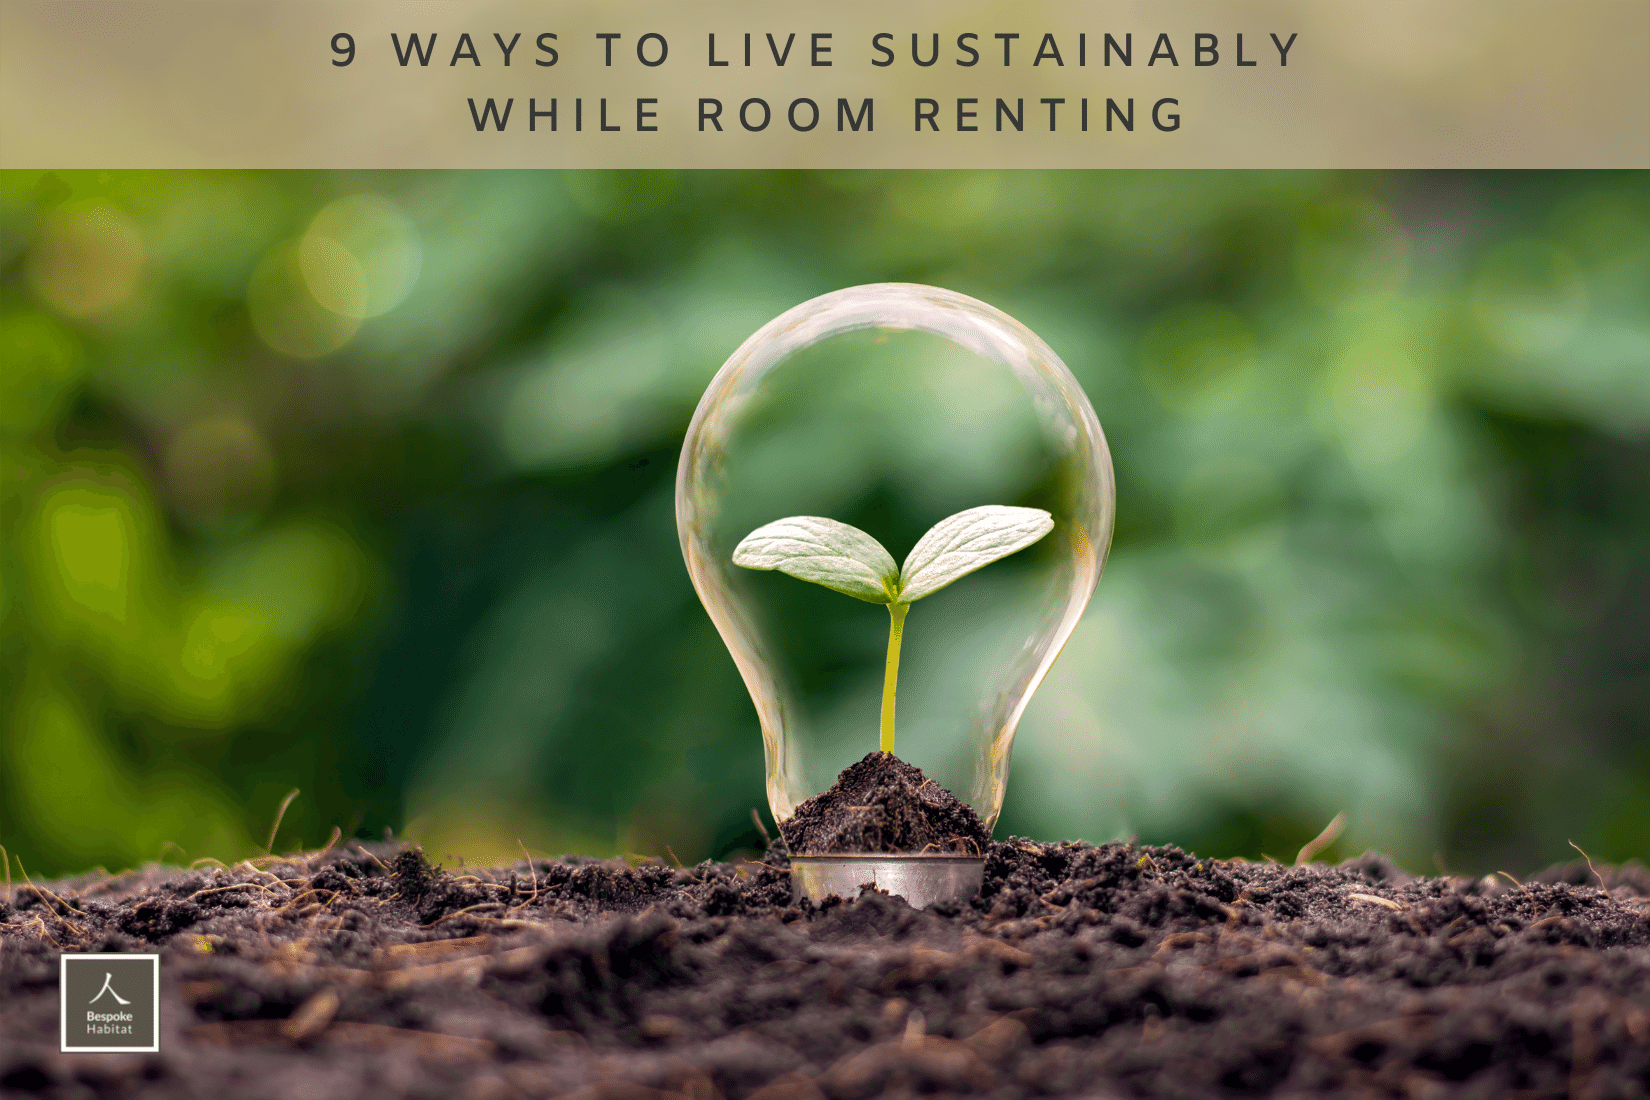 9 Ways to Live Sustainbly While Room Renting